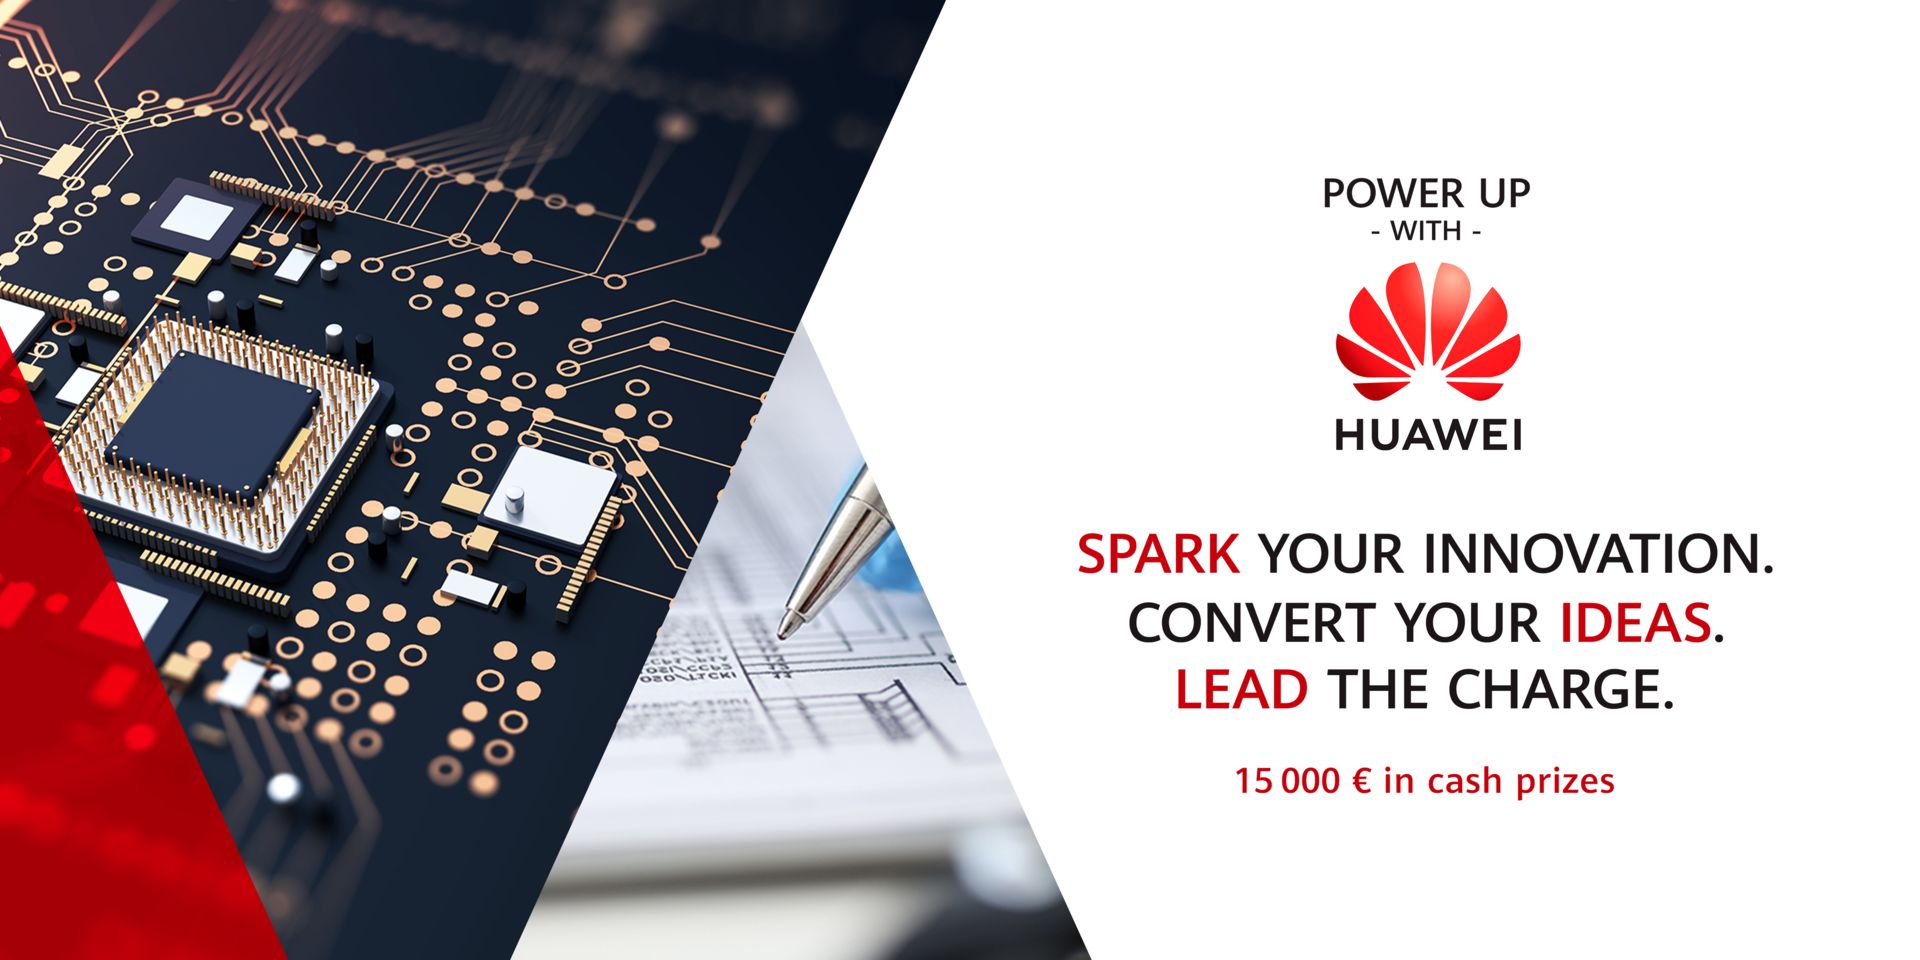 Power Up with Huawei, Virtual, Germany